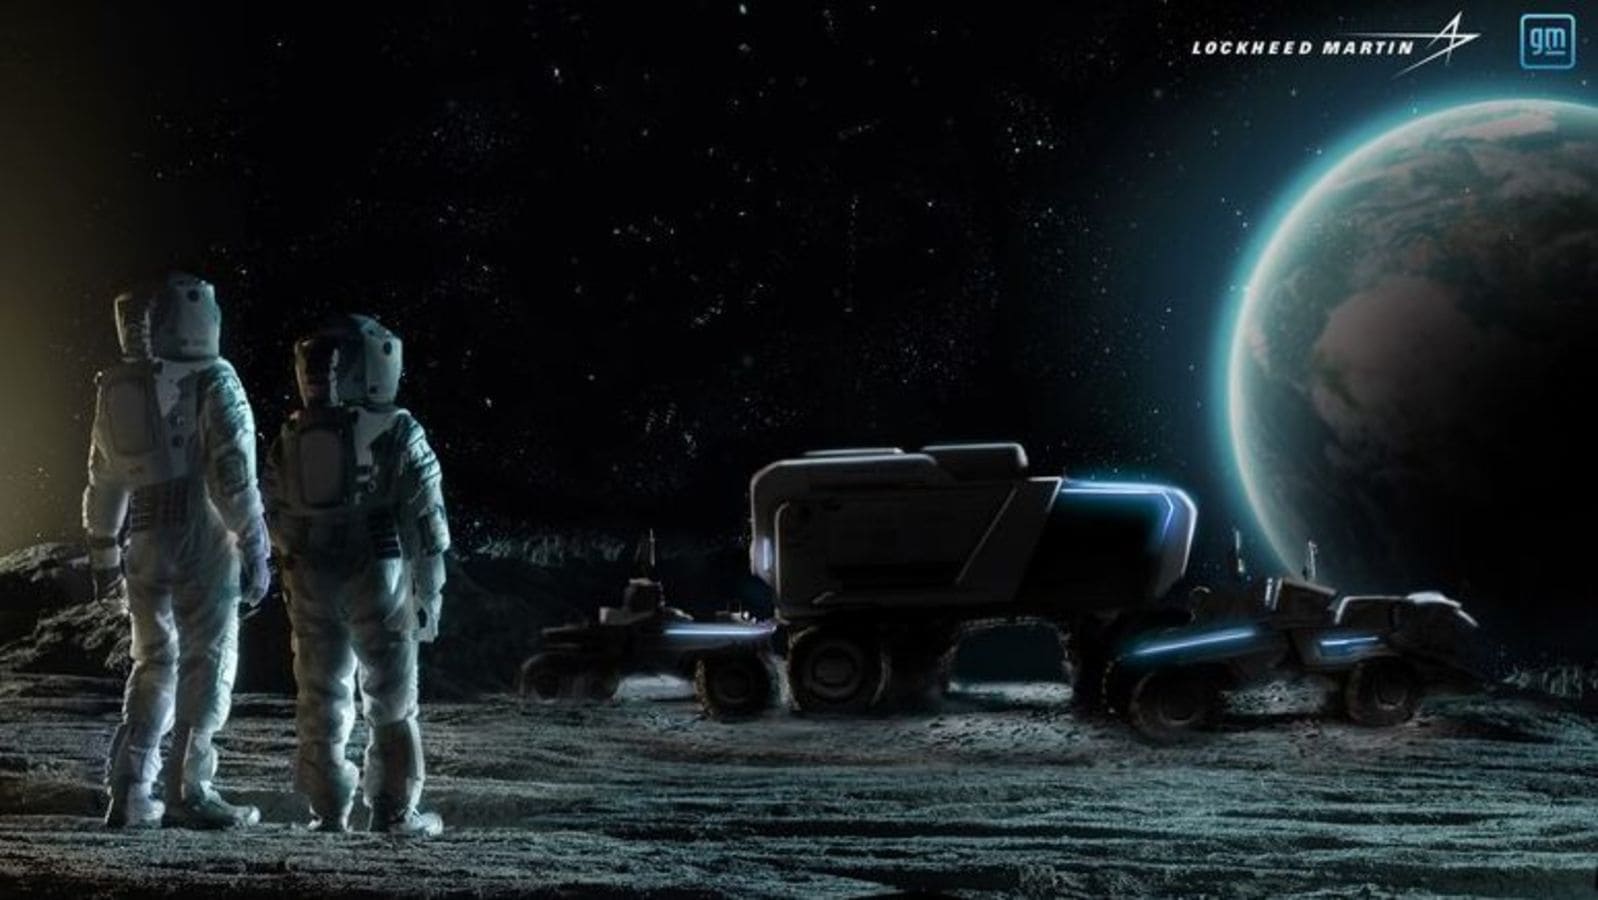 GM aims for the moon, to develop off-road, self-drive rover with ...